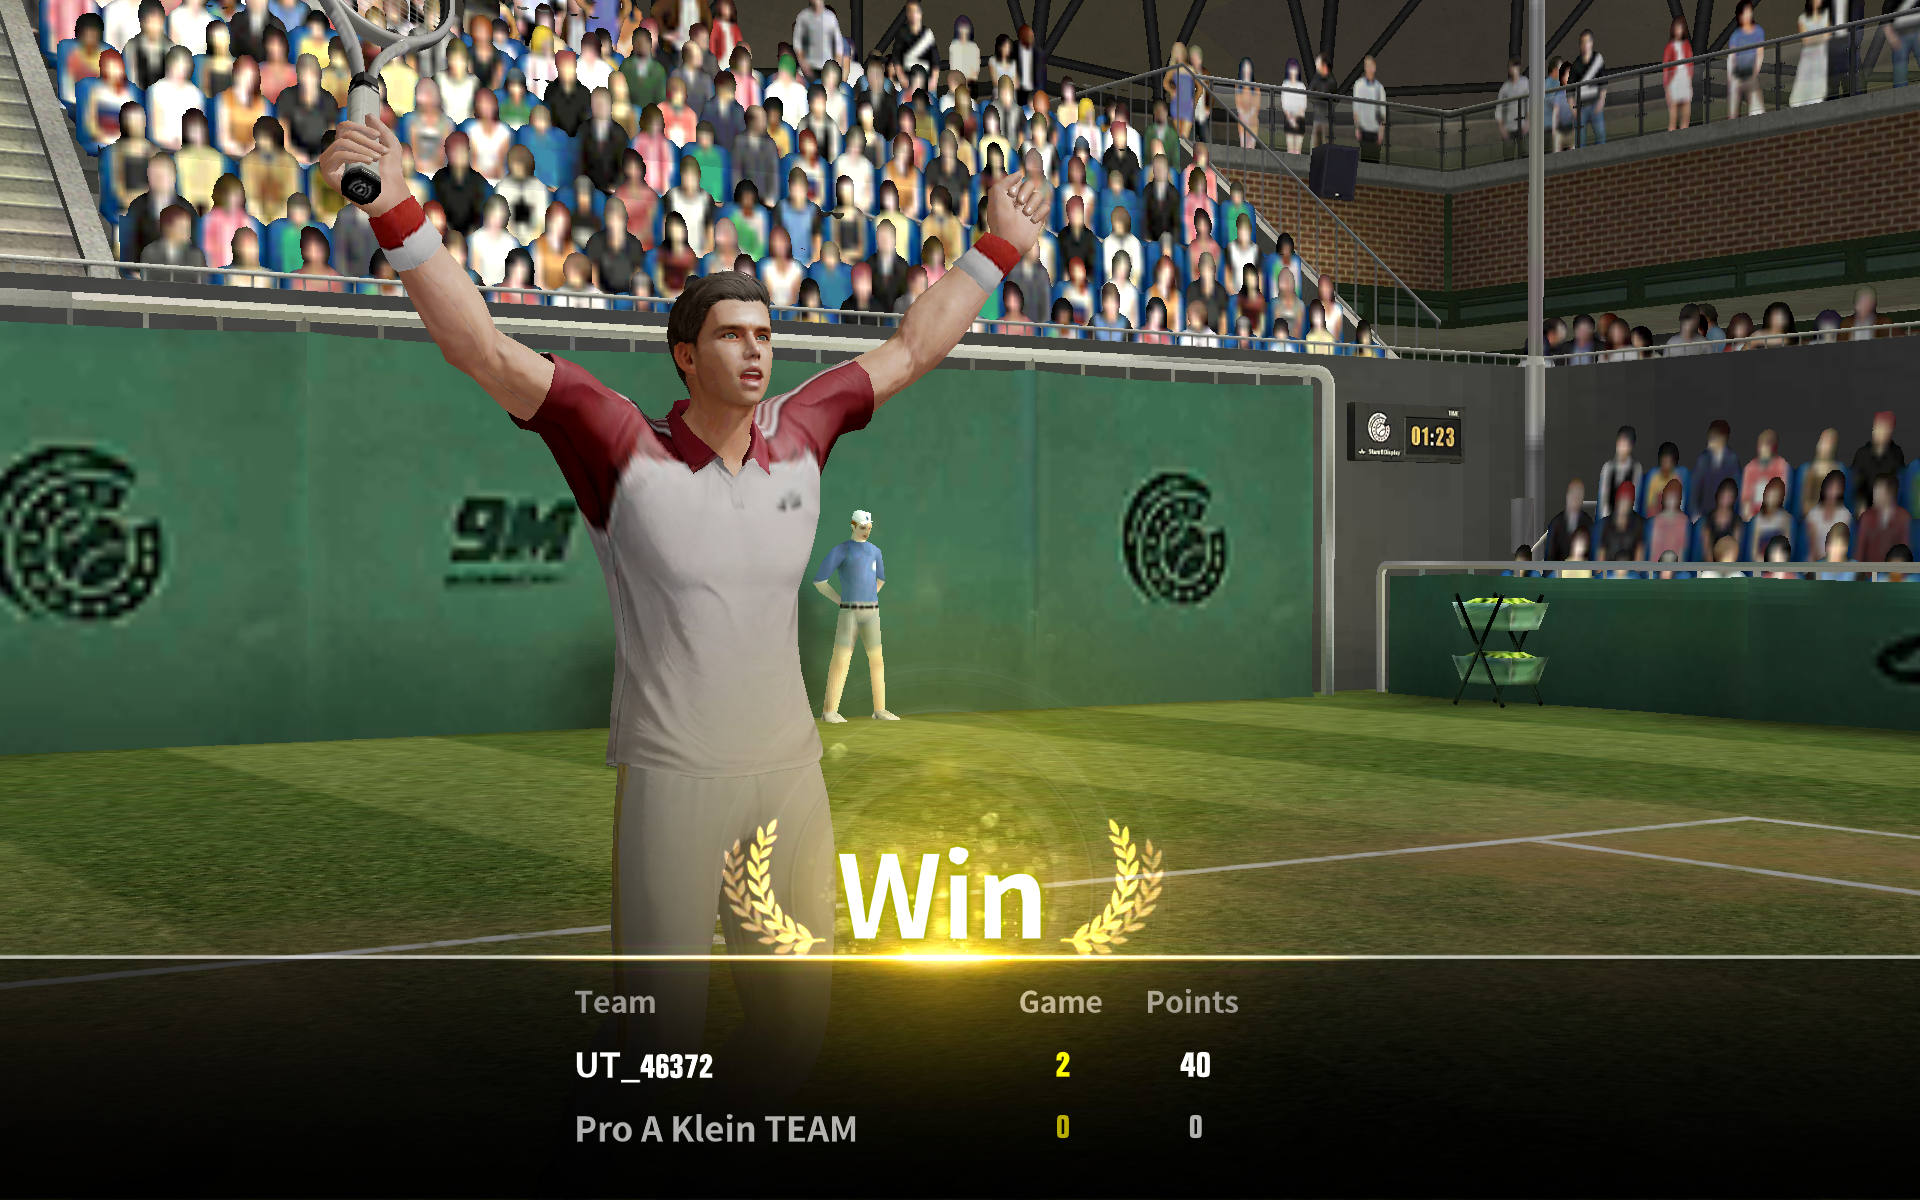 Ultimate Tennis: 3D online sports game APK 3.16.4417 for Android – Download Ultimate  Tennis: 3D online sports game APK Latest Version from APKFab.com